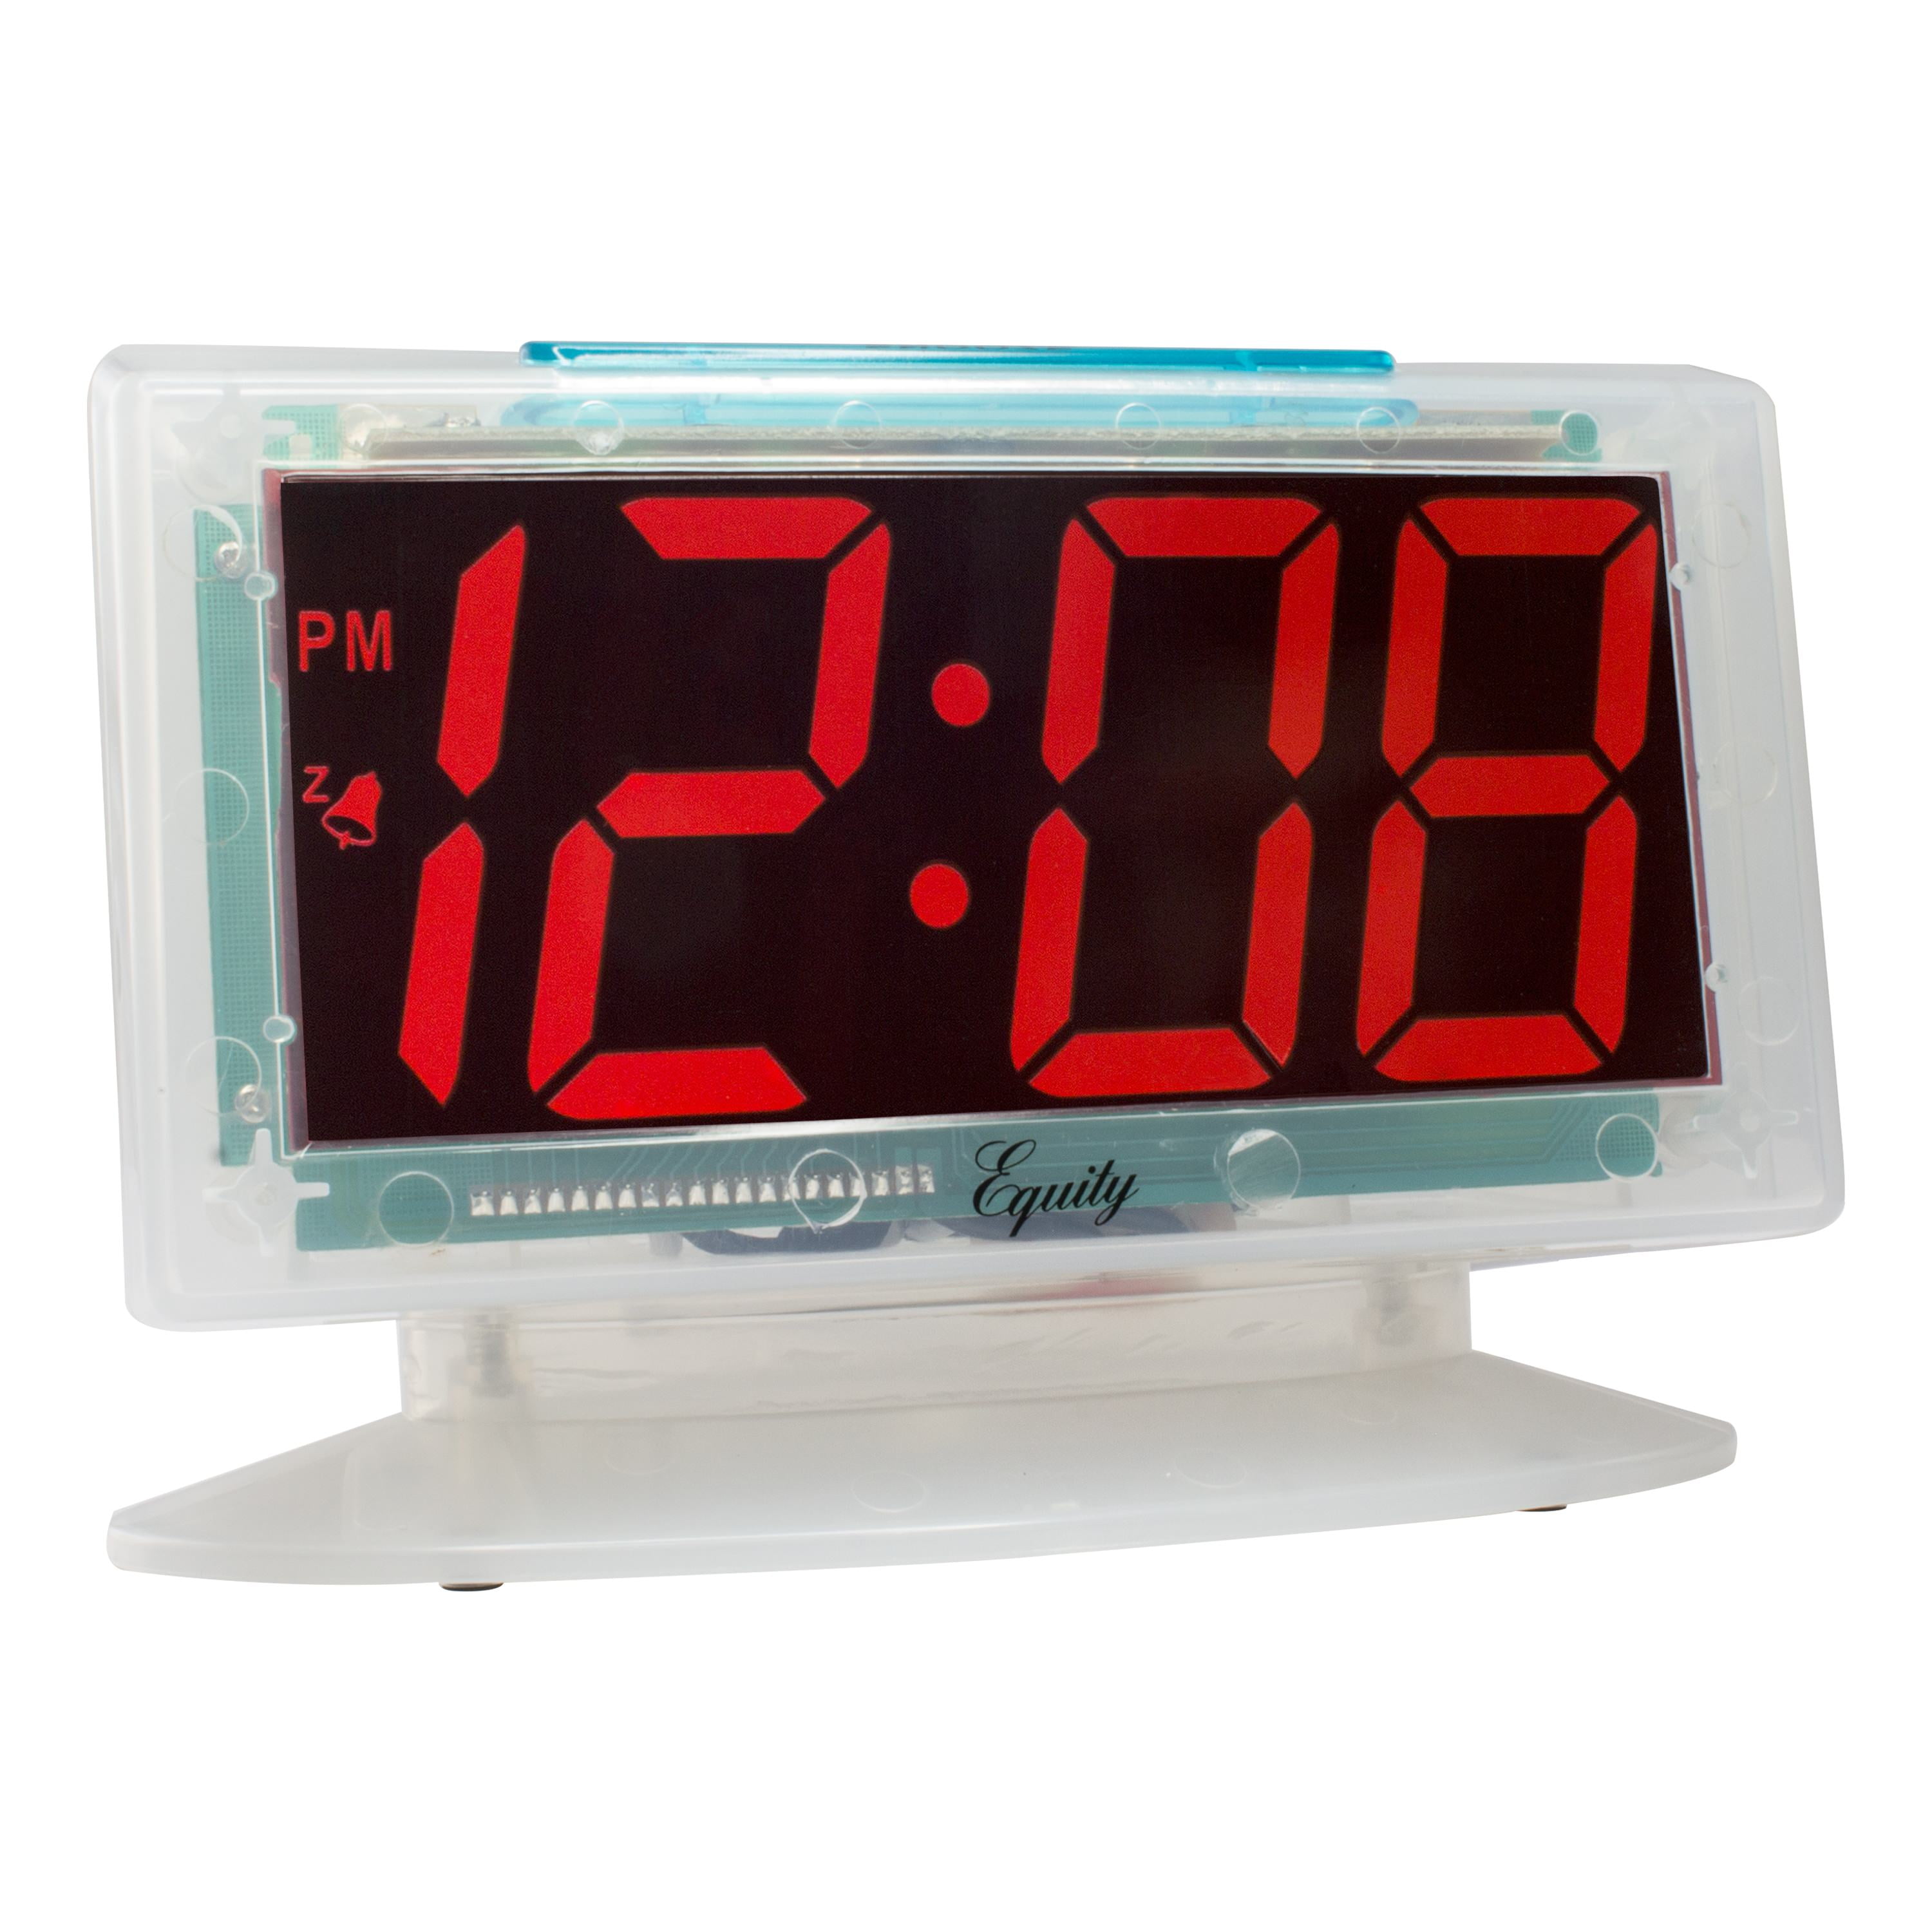 30040 Equity by La Crosse AC Powered 1.8" Red LED Clear Digital Alarm Clock 